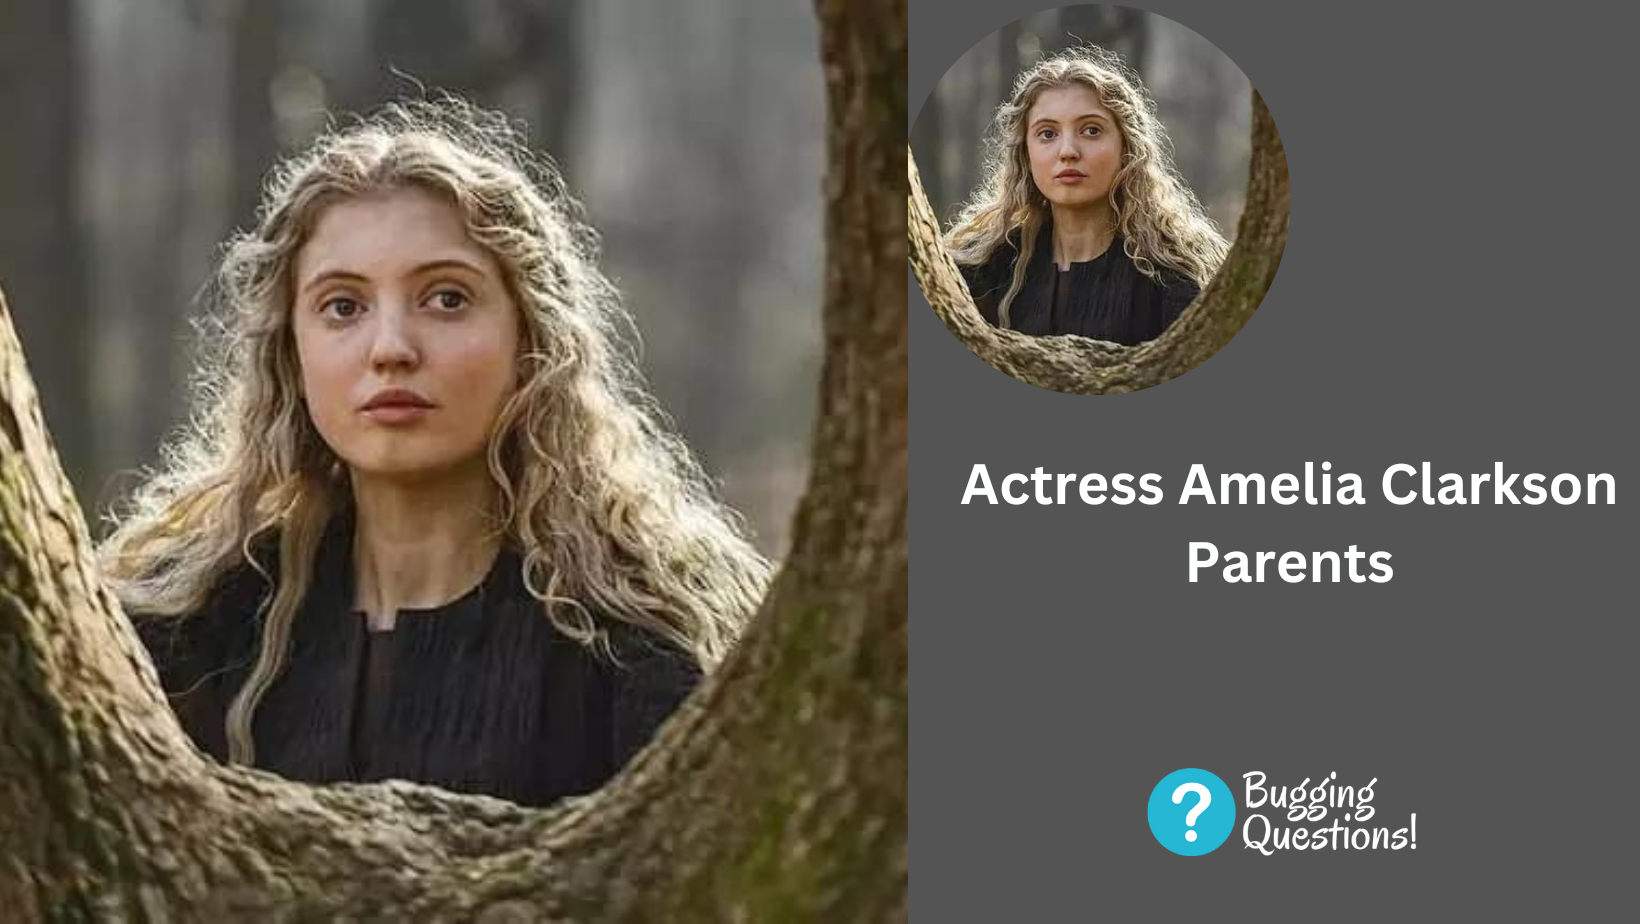 Actress Amelia Clarkson Parents: Who Are They? Wikipedia Bio, Age And Instagram Explored